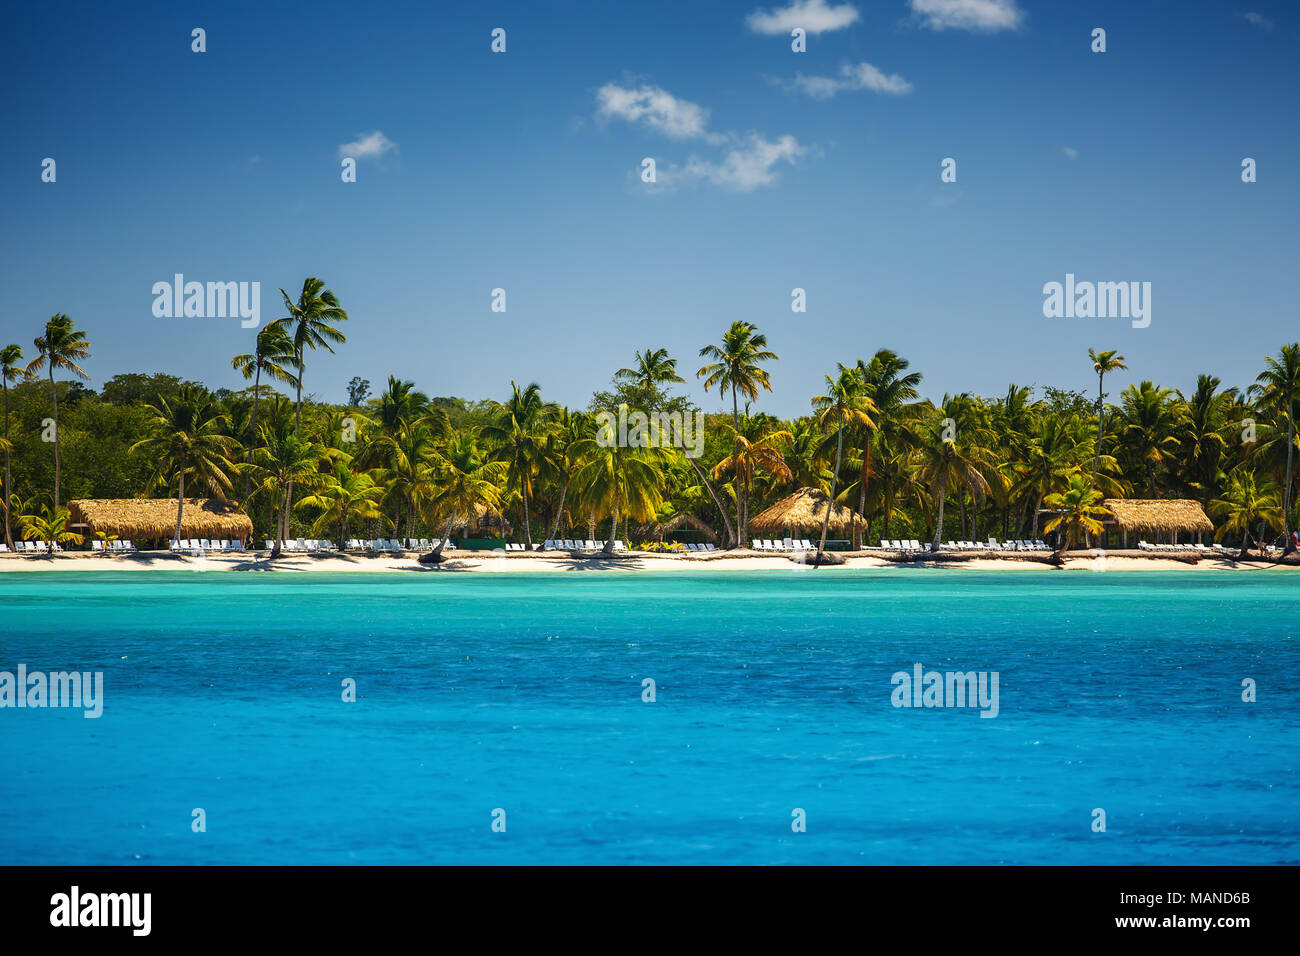 Palm trees on the tropical beach, Dominican Republic Stock Photo